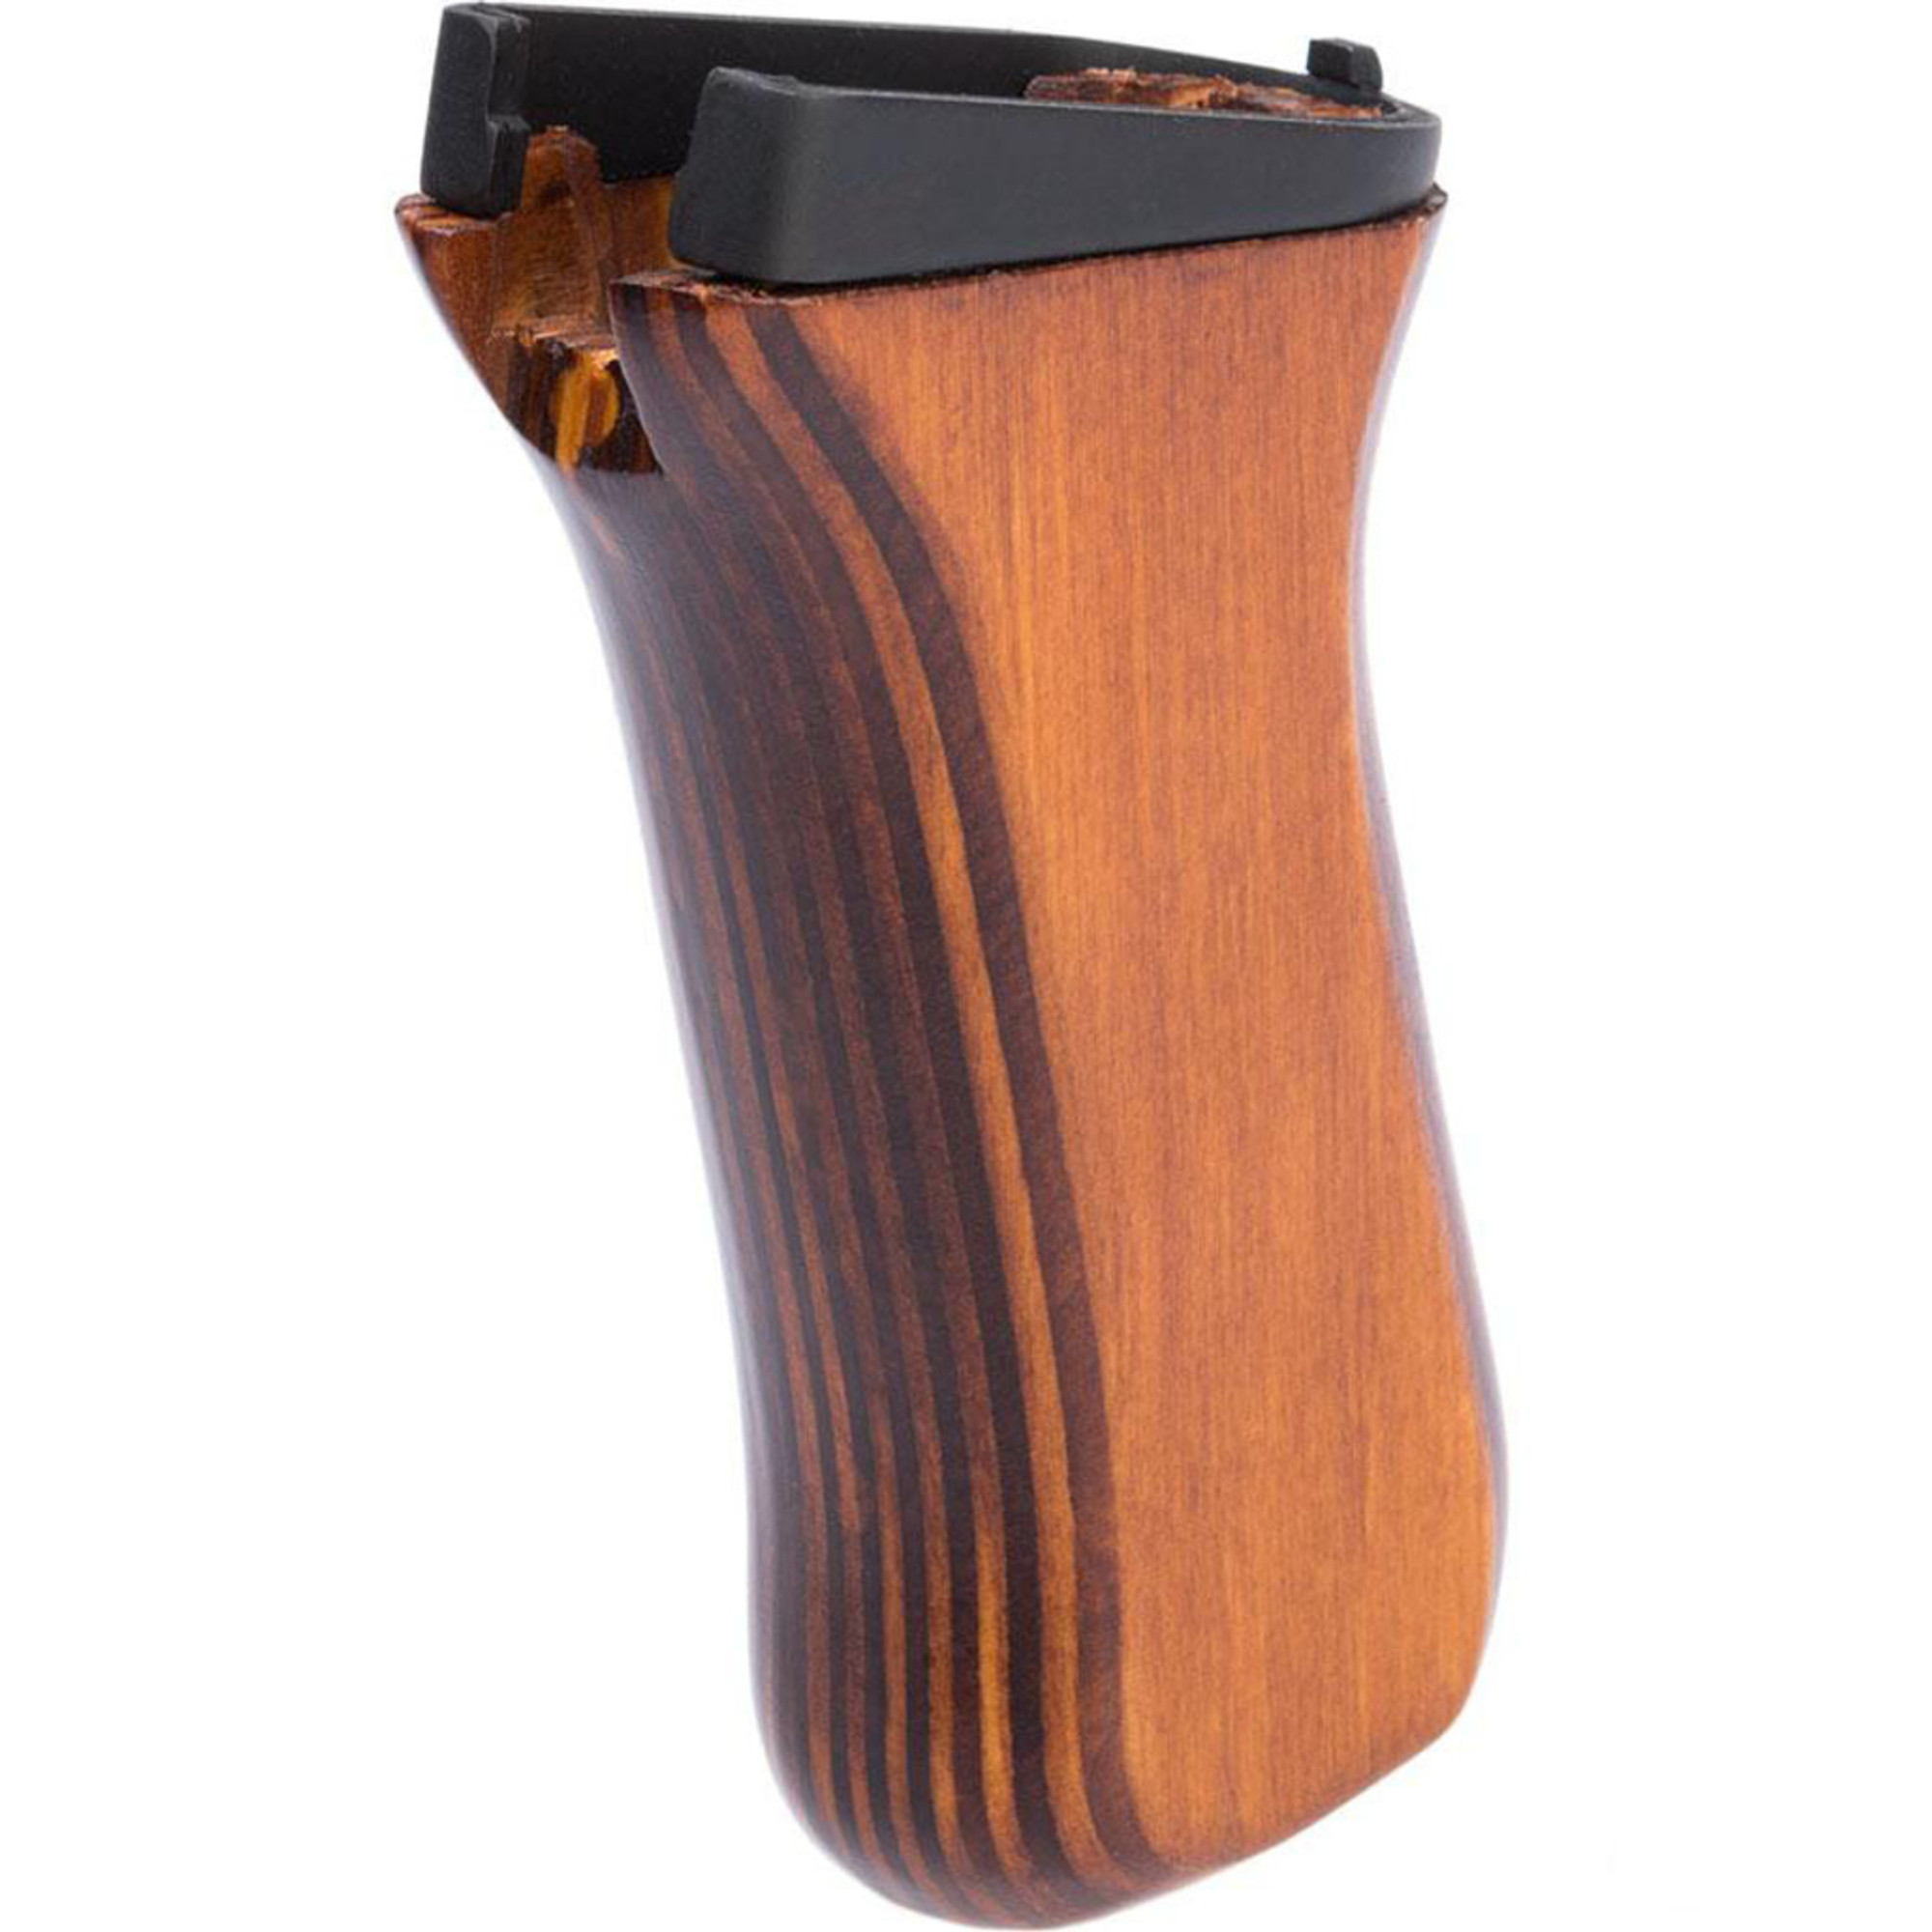 LCT Airsoft Wooden Pistol Grip for RPKS-47 Series Airsoft Rifles